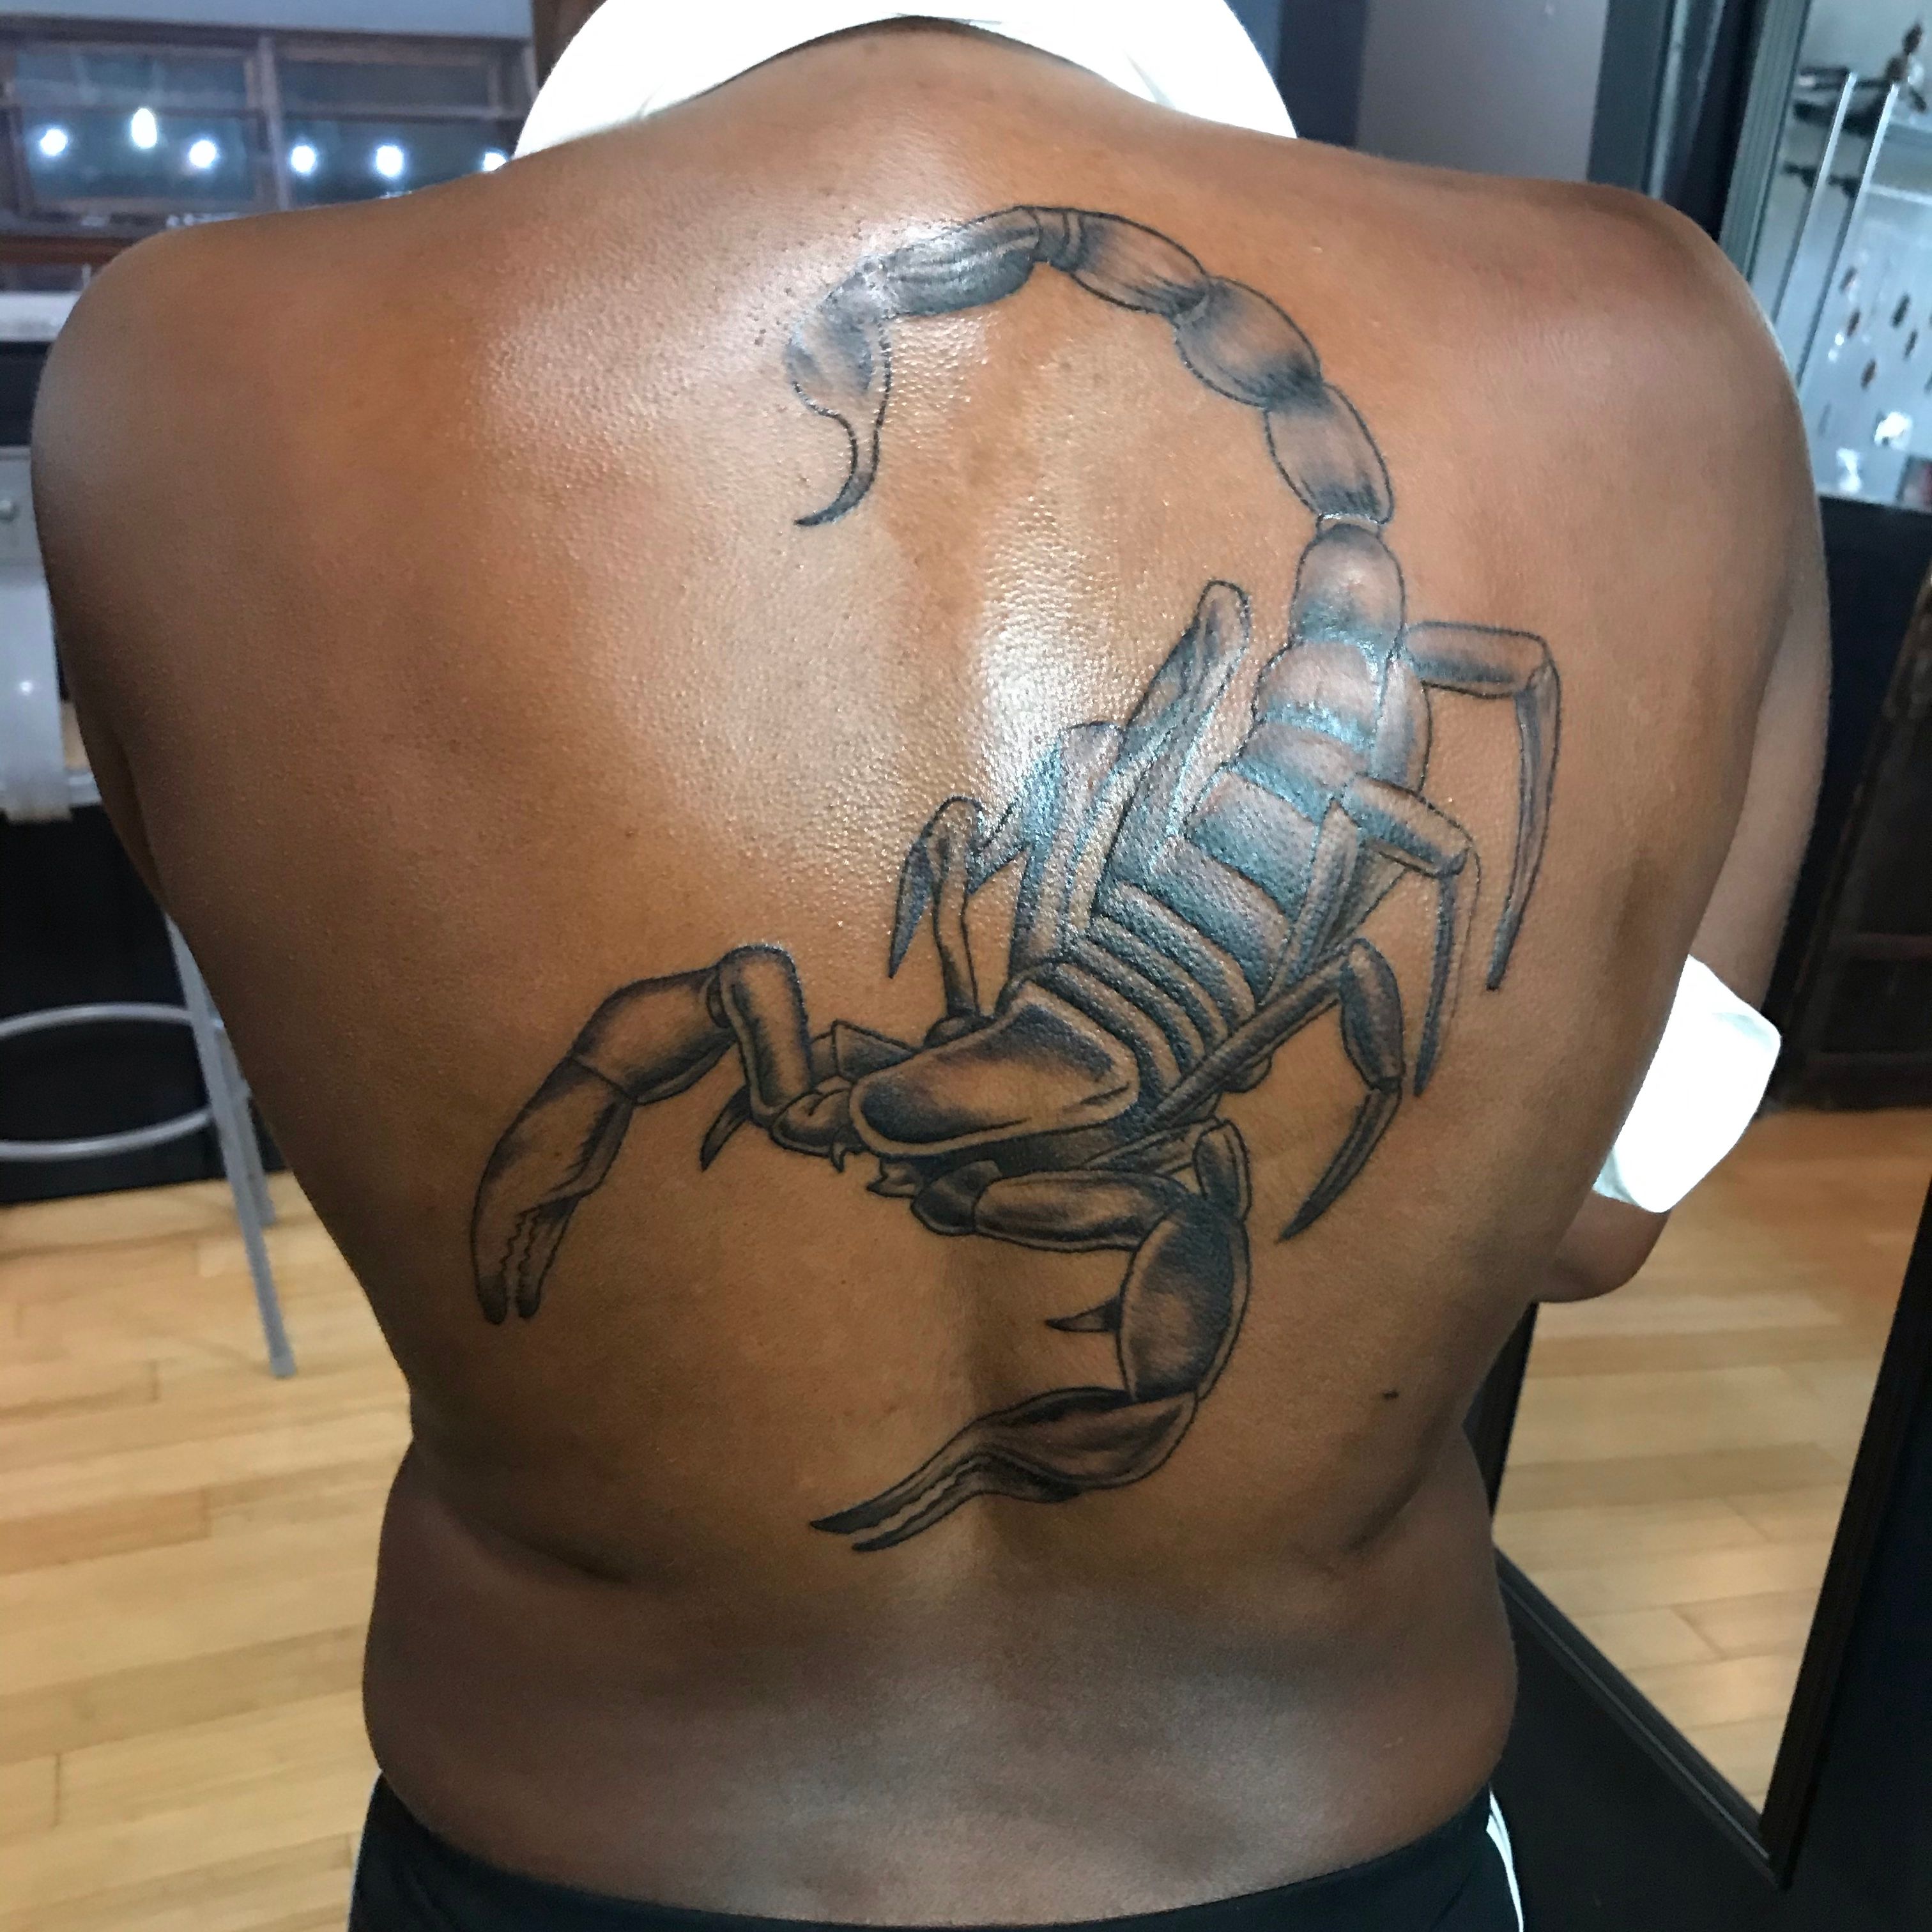 What Is the Meaning Behind a Scorpion Tattoo